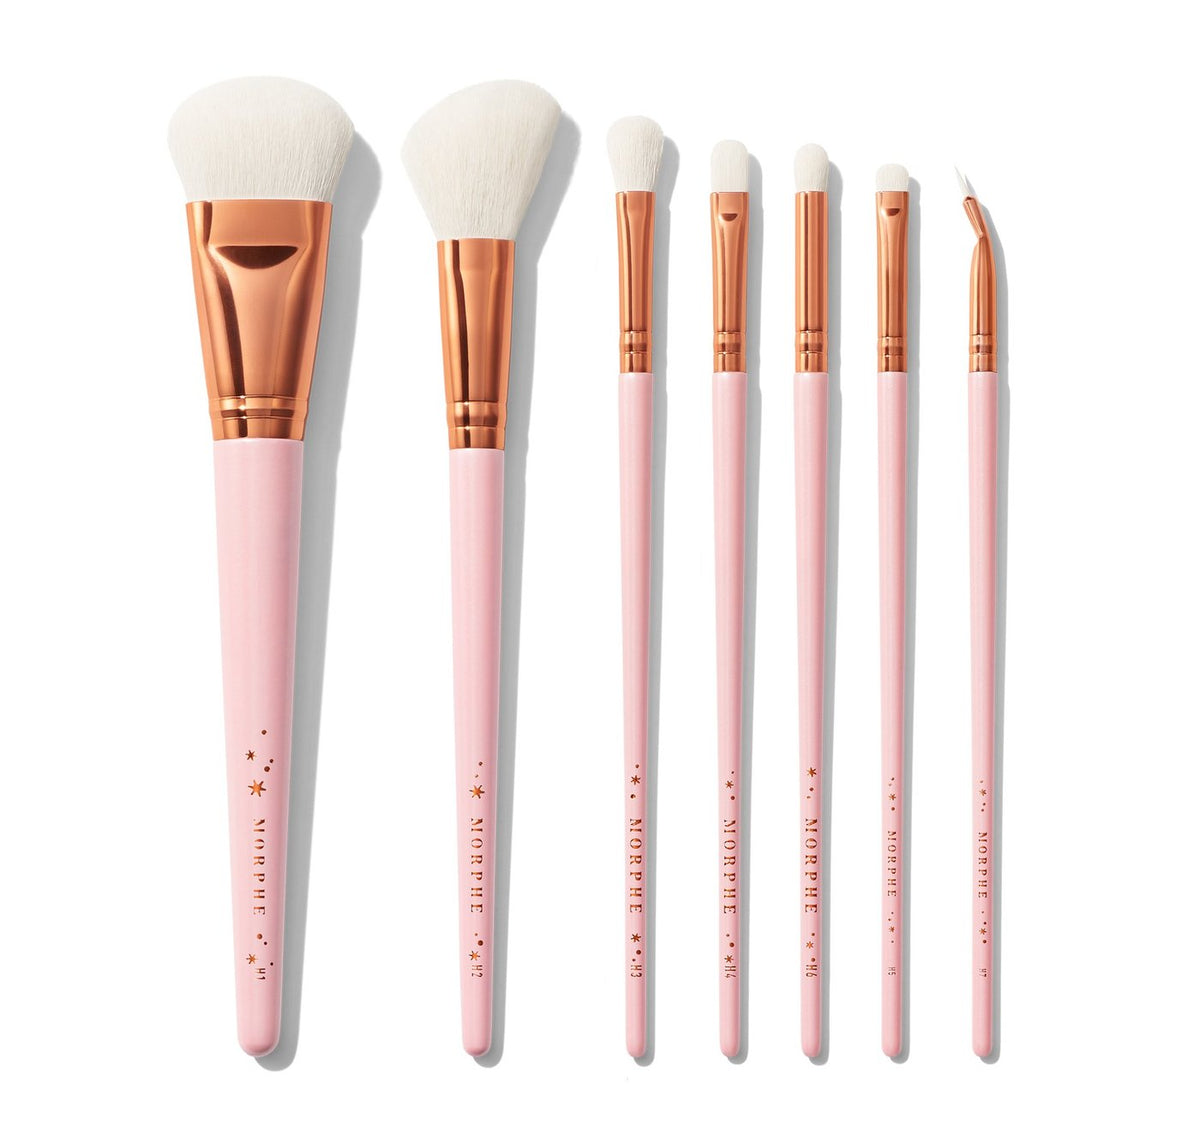 THE BEST OF BLENDS 7-PIECE BRUSH SET